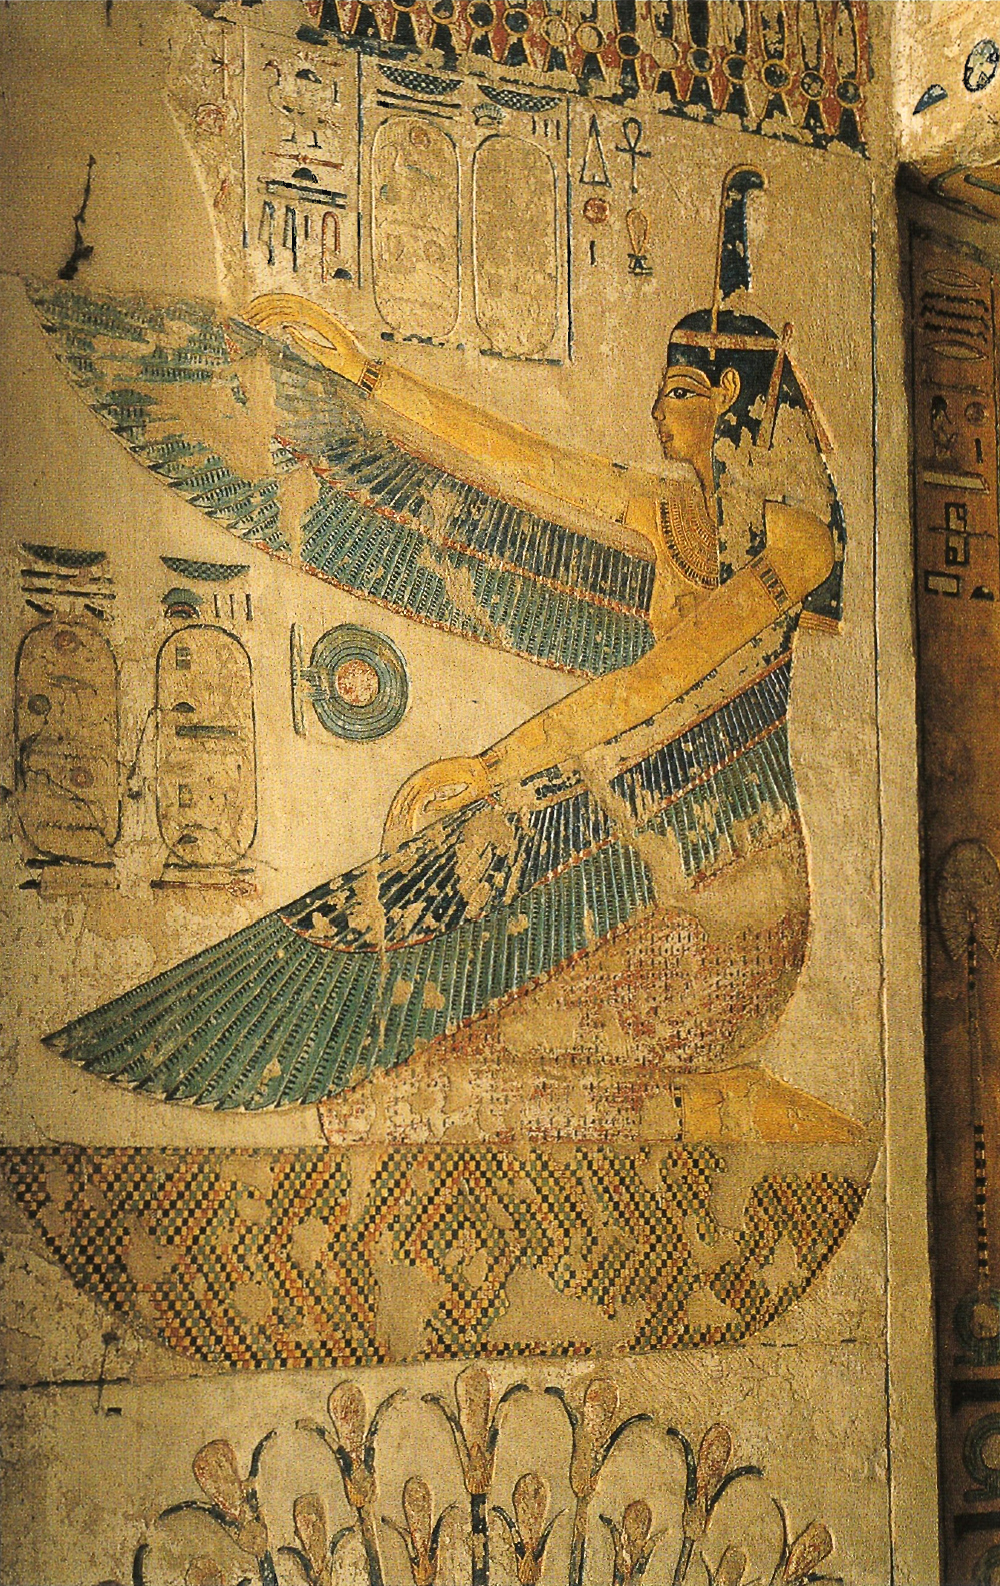 Maat, goddess of truth and personification of the concept maat, wearing on her head the feather of truth and opens wings to embrace and protect a hieroglyphic sign which could signify 'mourn', as utilized at the entrance to a number of later New Kingdom royal tombs, 19th dynasty, Tomb of Siptah, Valley of the Kings, Western Thebes, Luxor, Egypt.